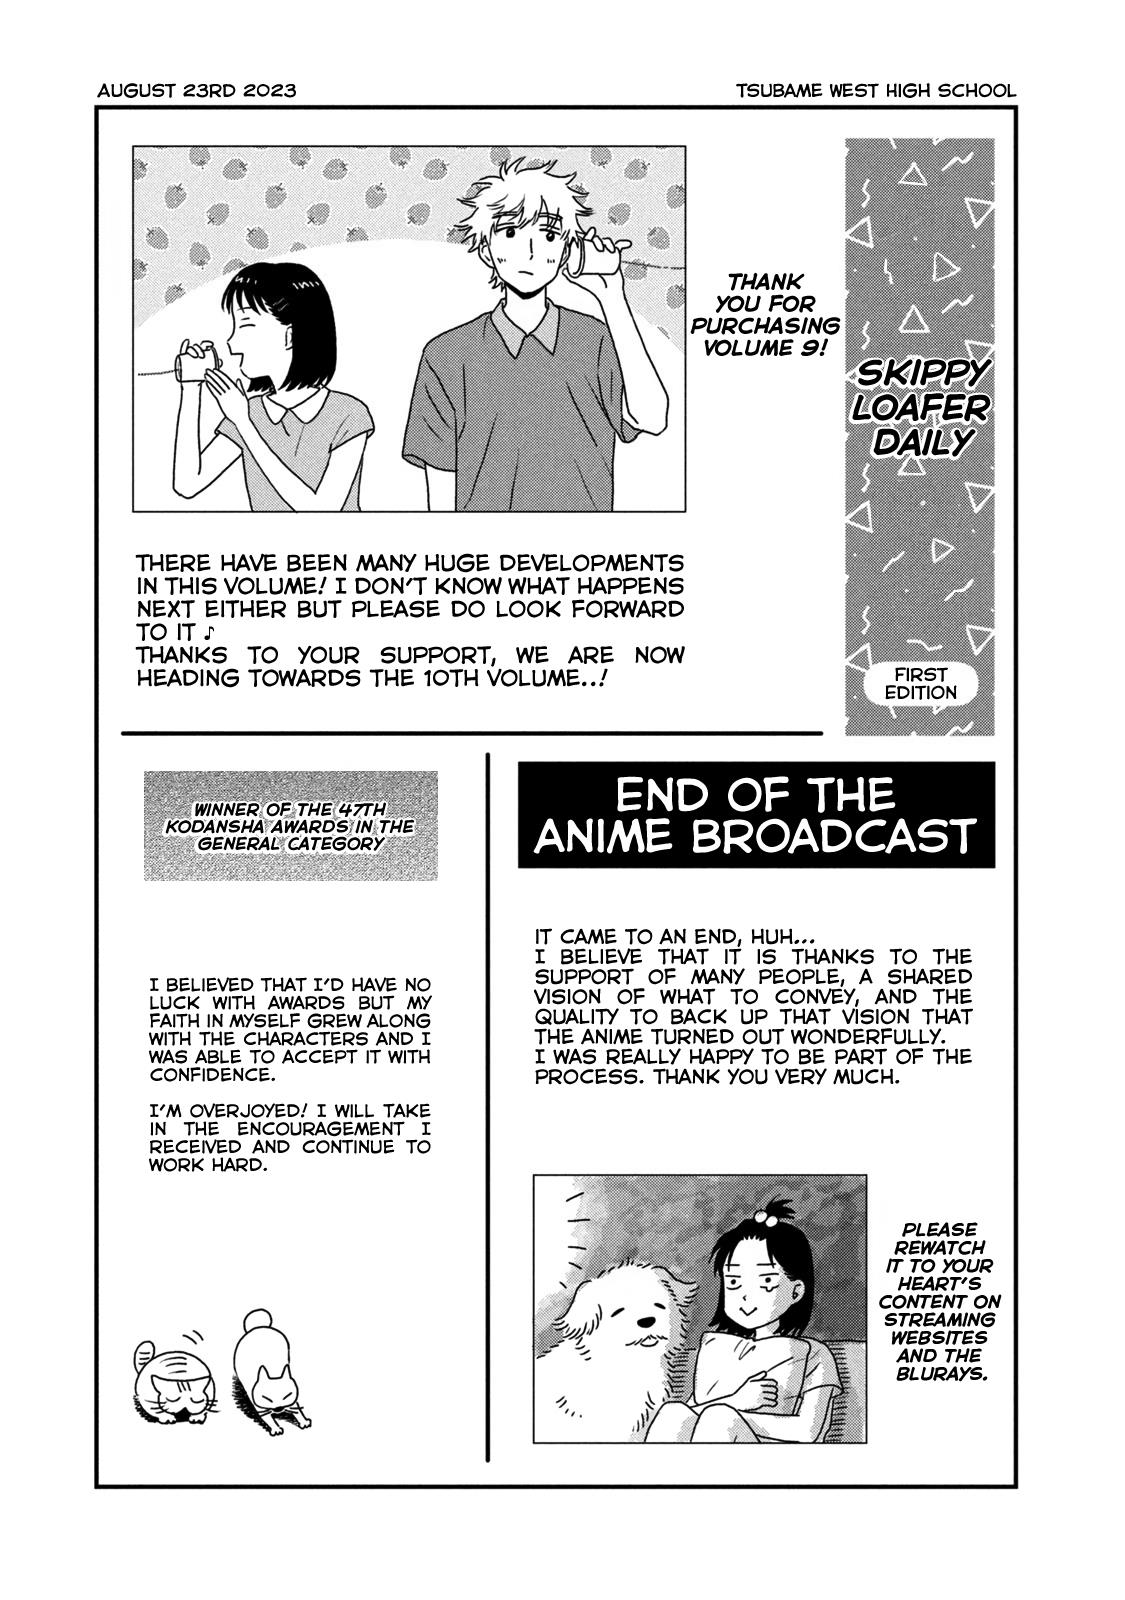 Skip To Loafer - Page 1